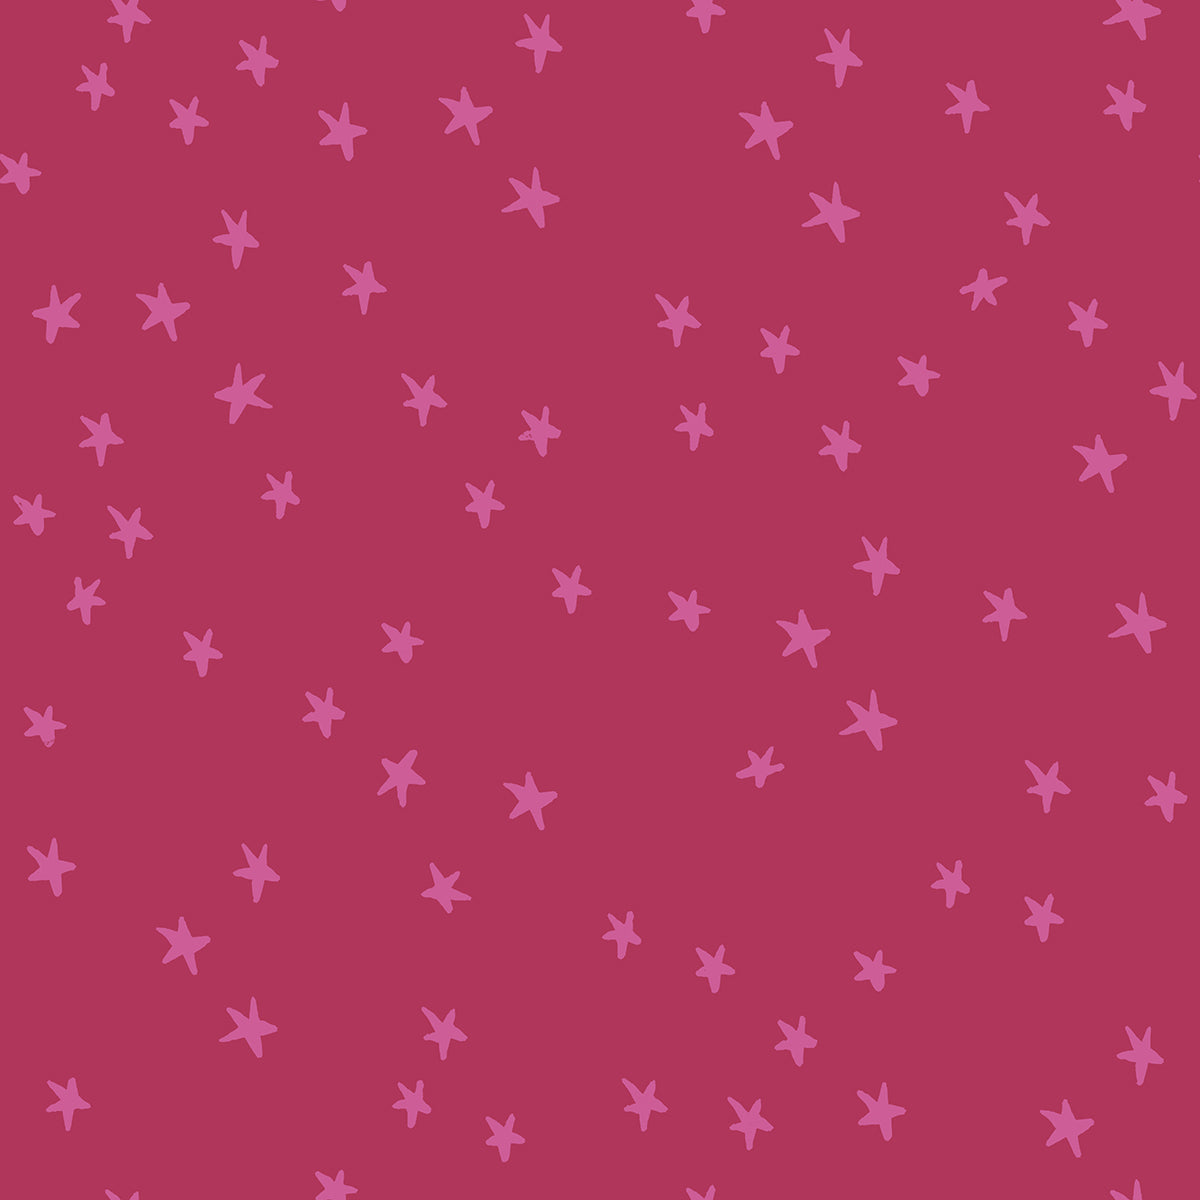 Starry by Alexia Abegg : Starry - Plum RS4109 61